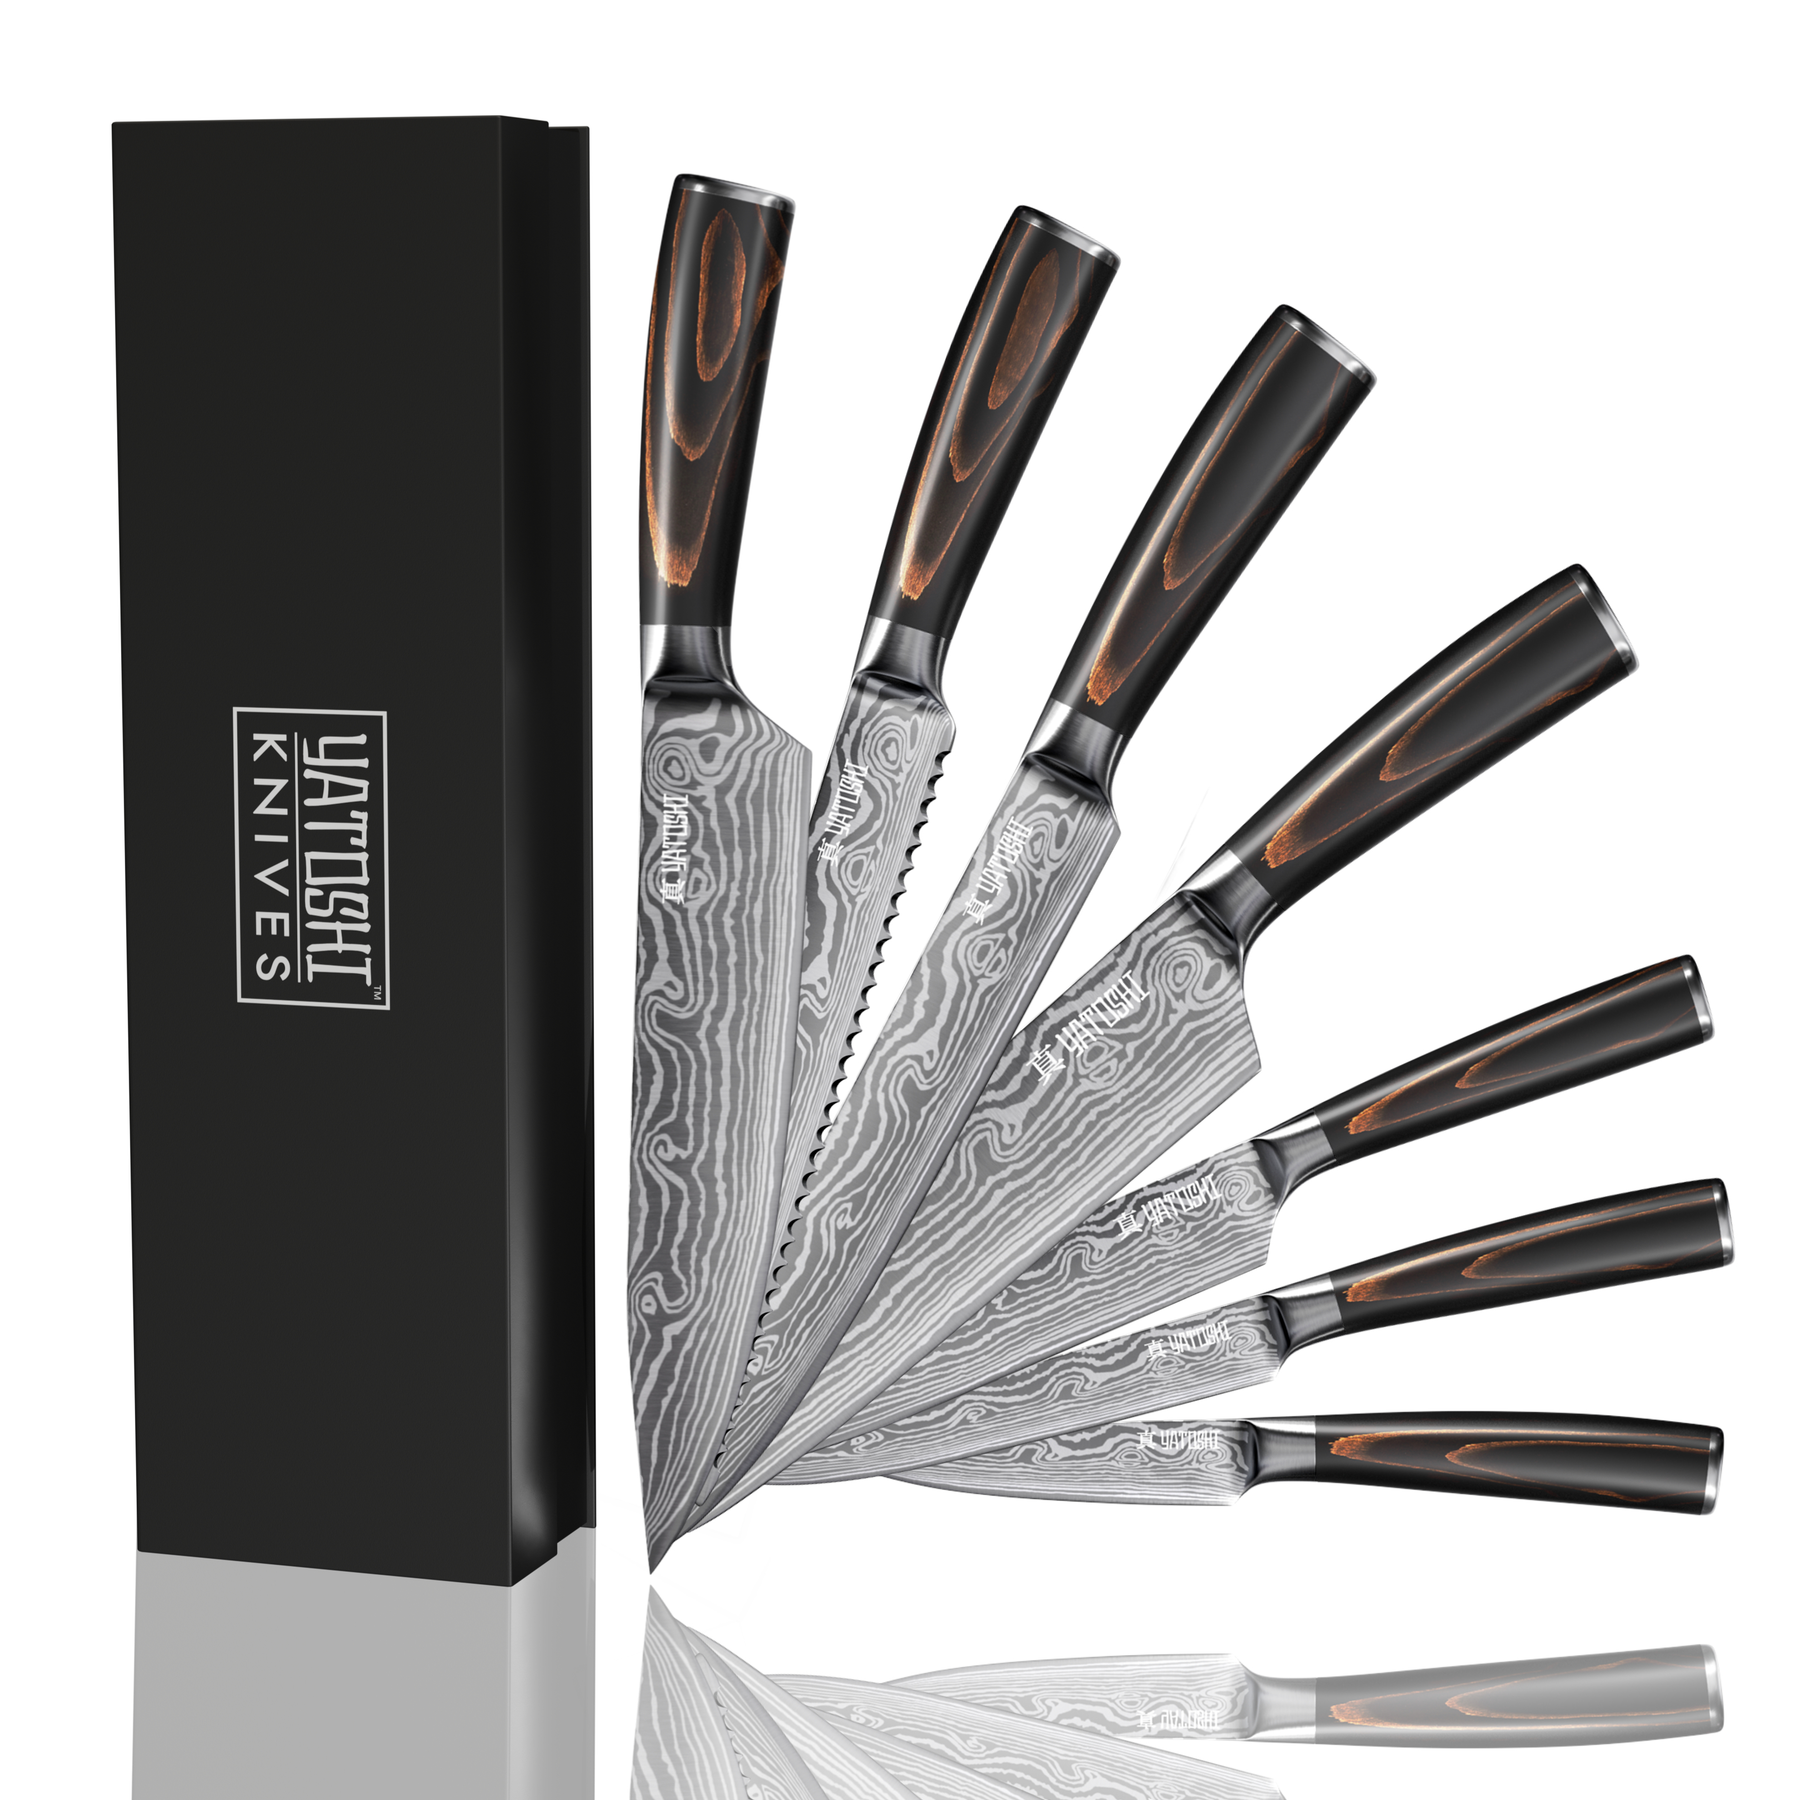 Professional Kitchen Knives & Cutlery